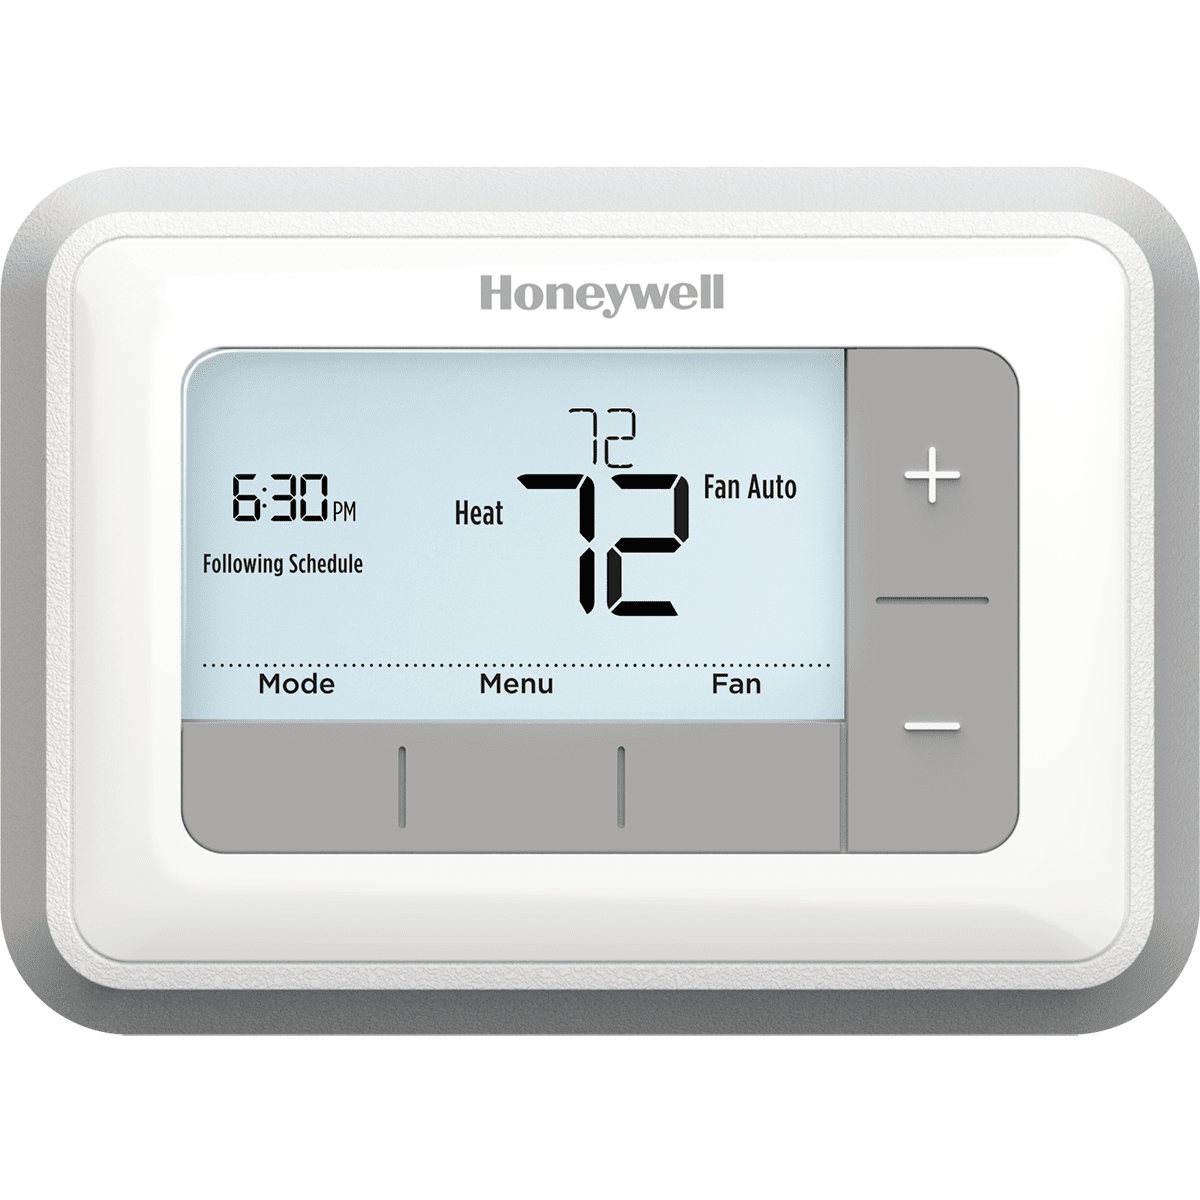 Honeywell Home T5 7-Day Programmable Thermostat (RTH7560E)